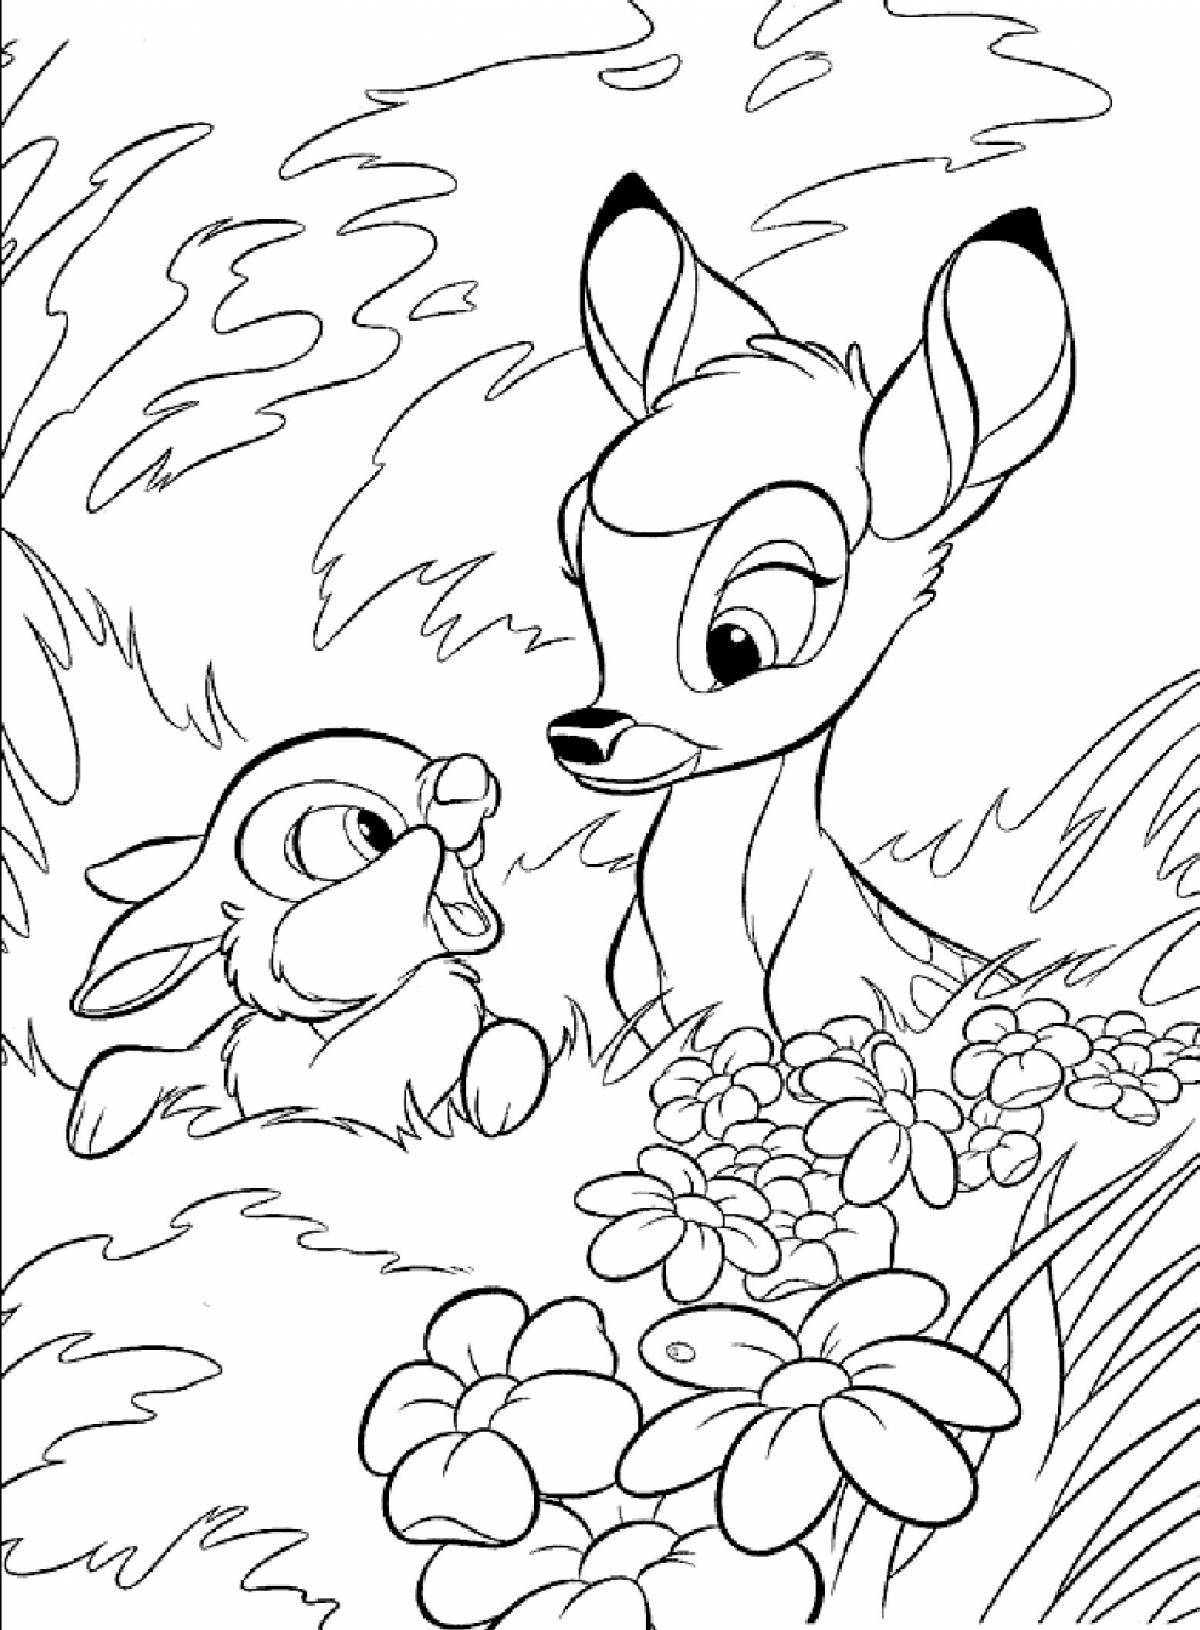 Great coloring book for kids 5-6 years old for girls animals